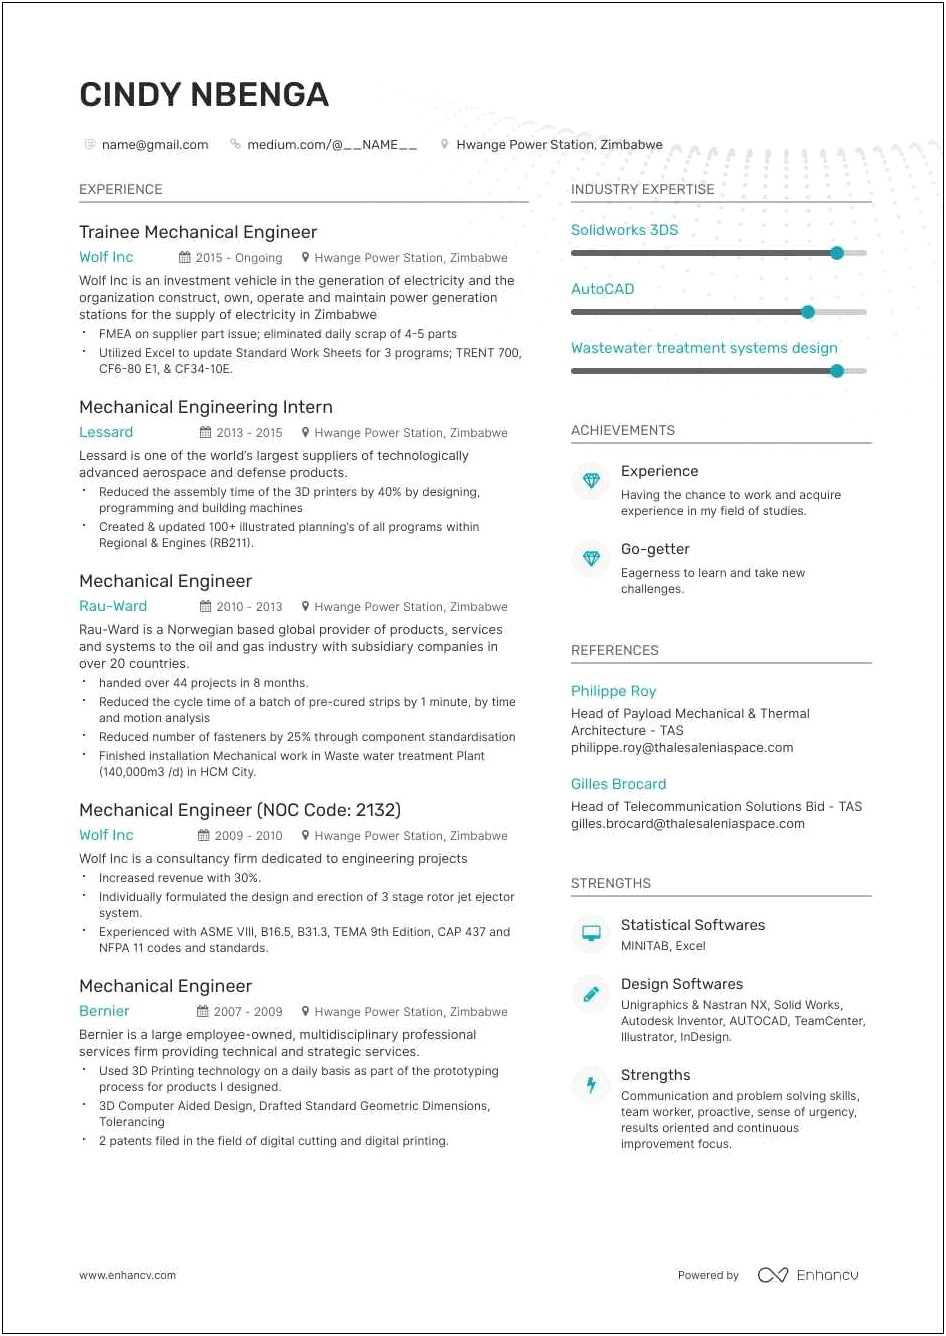 Gas Station Worker Resume Example